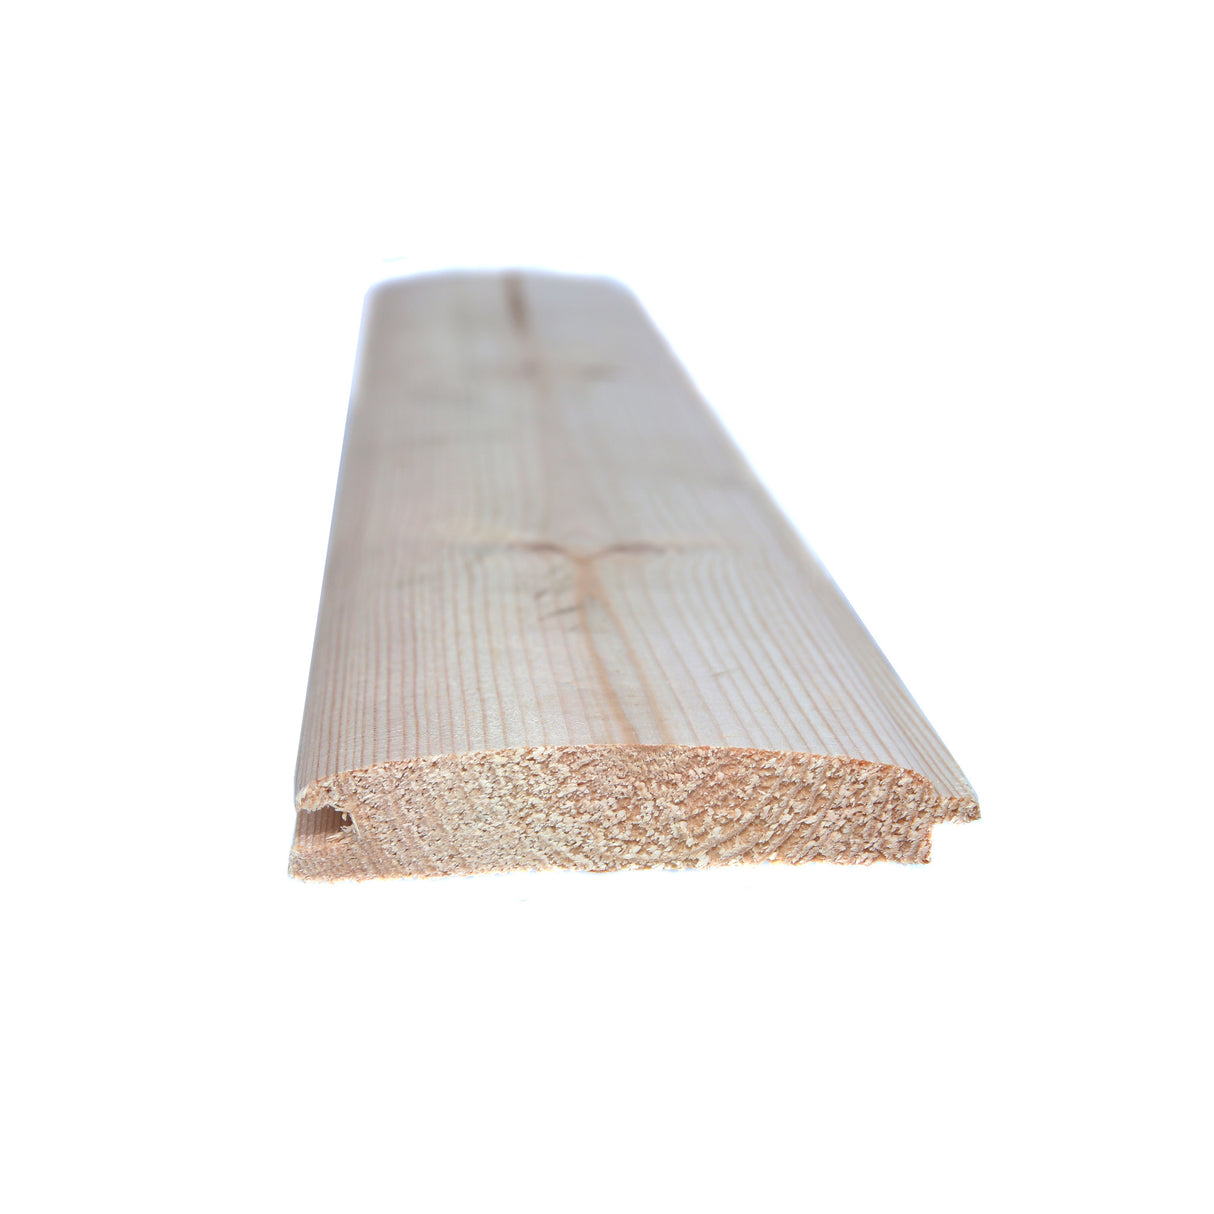 Untreated Timber LogLap Cladding - 21mm x 88mm (3.5") Finished Size (6954512187571)